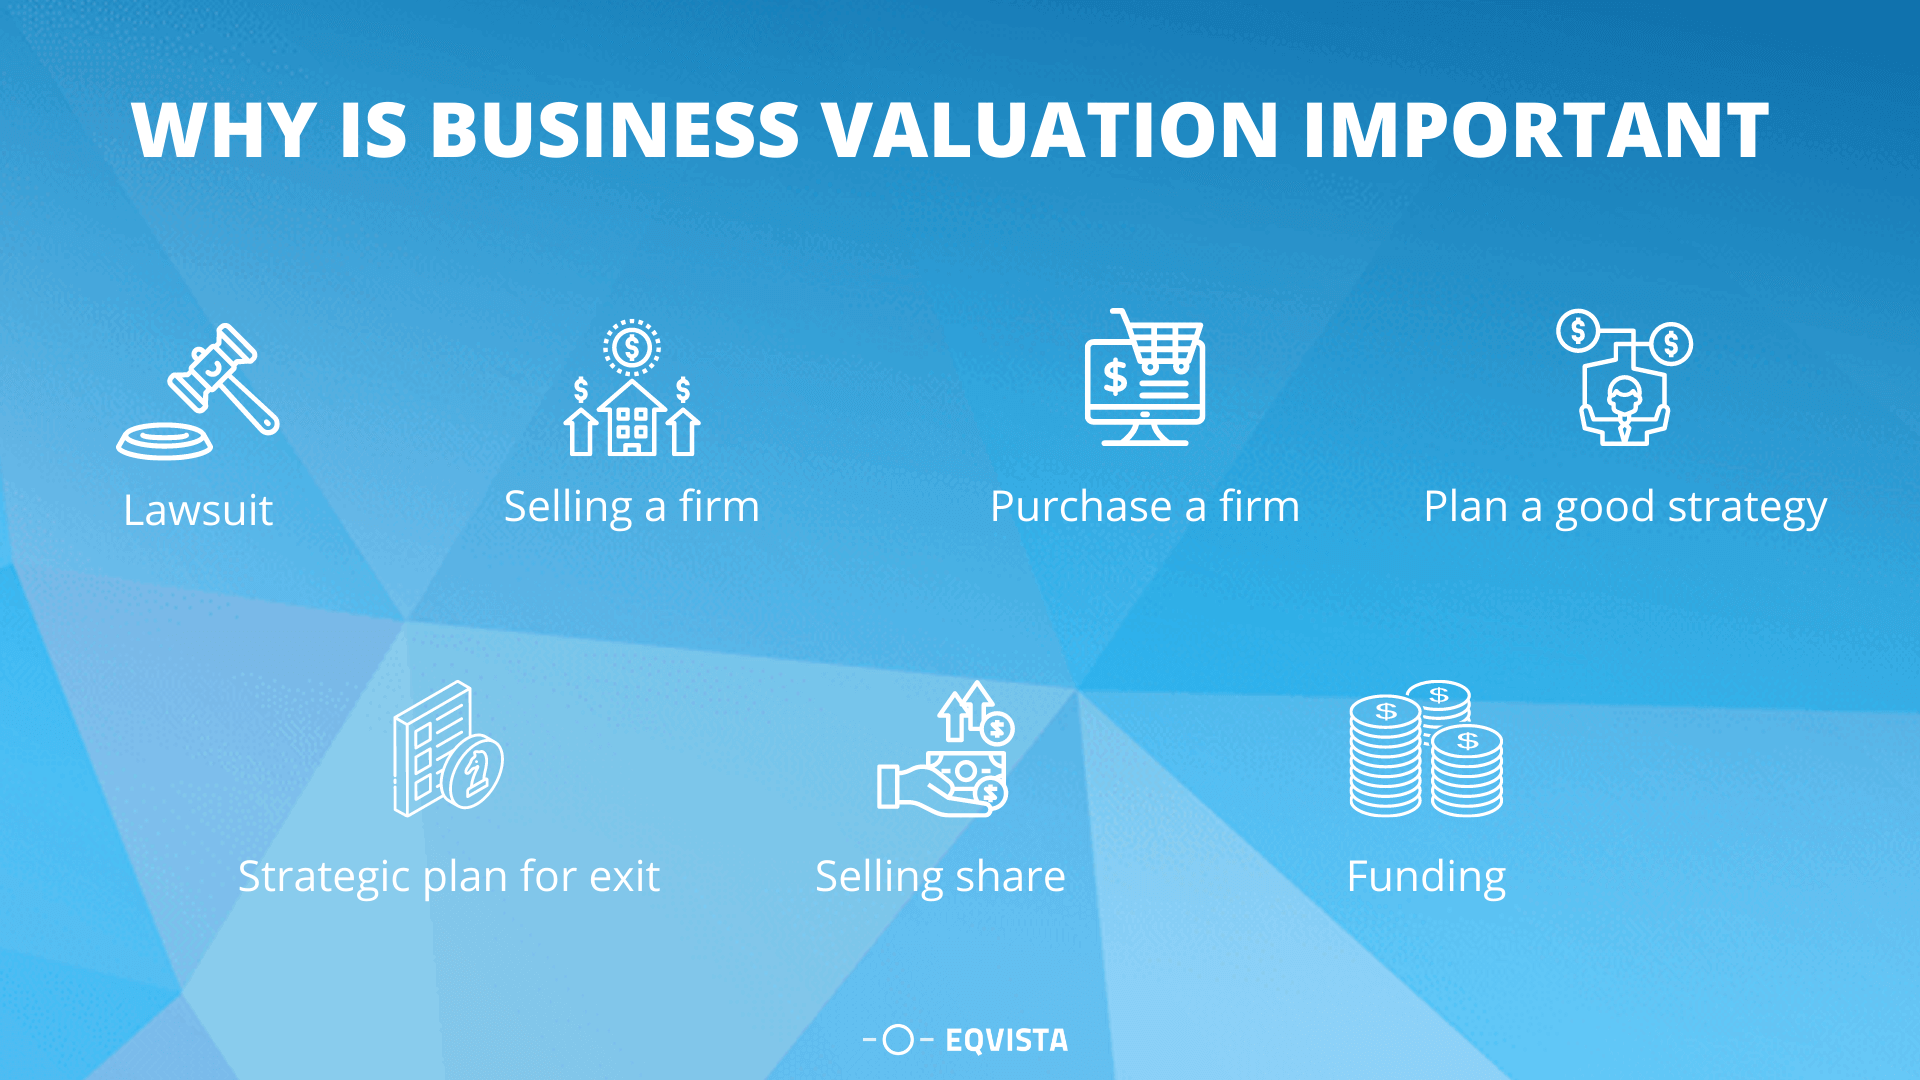 Why is Business Valuation Important?